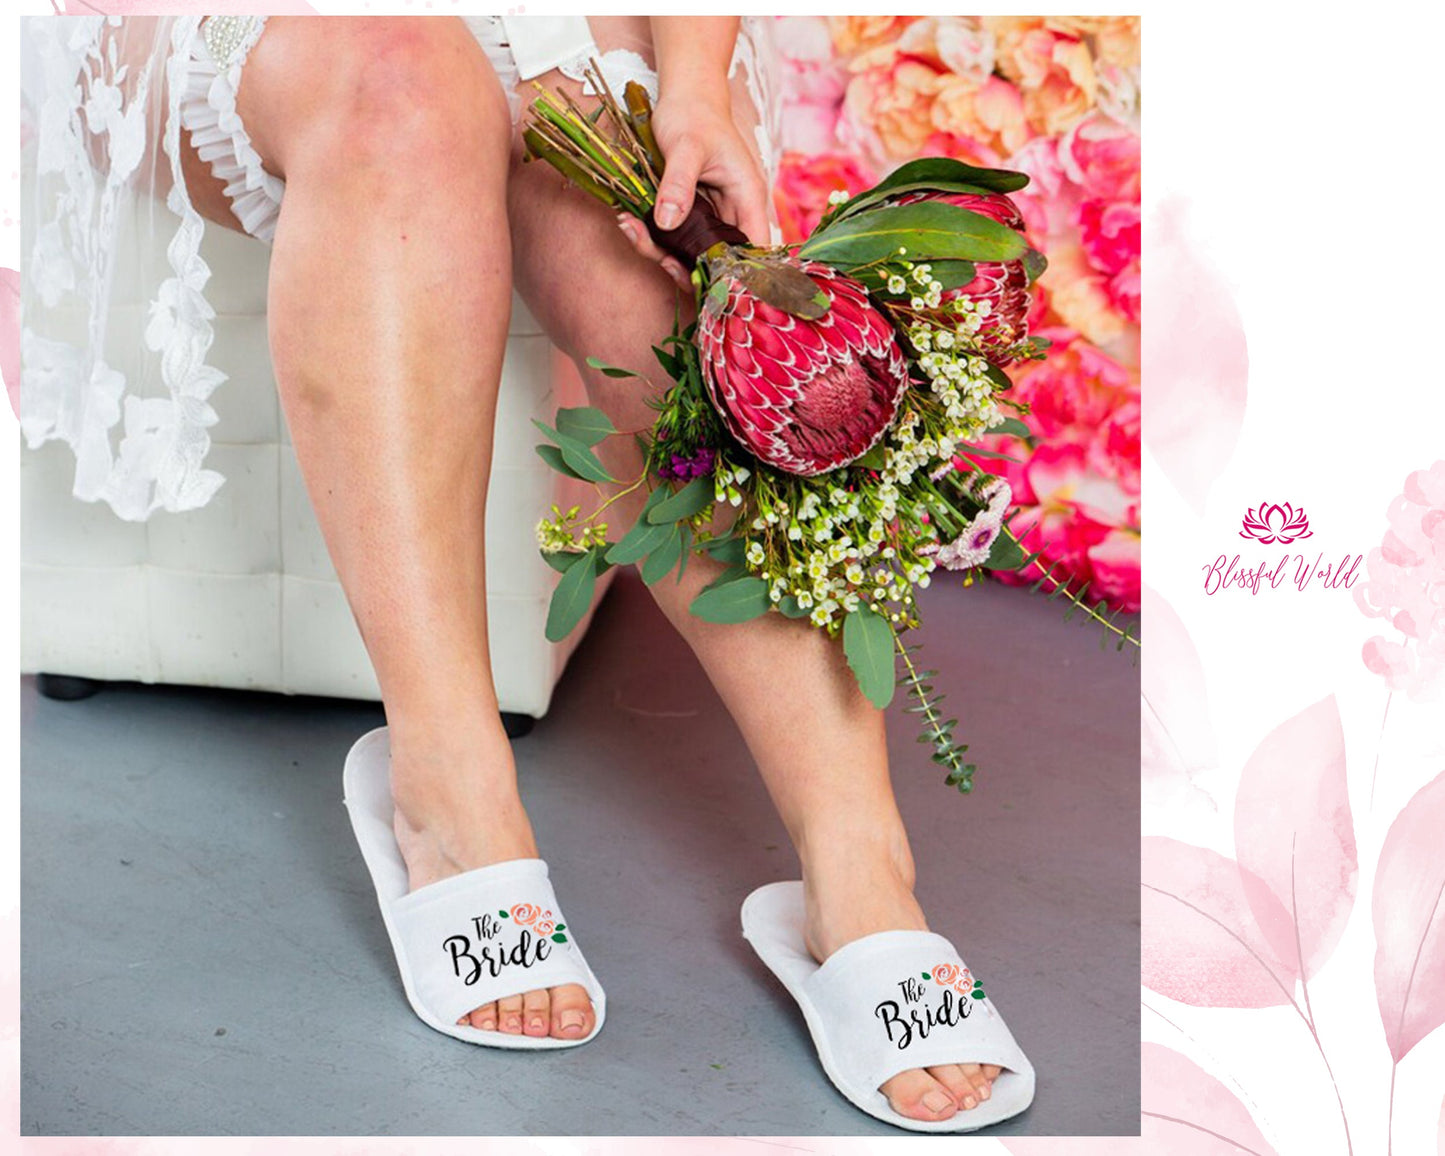 Bride slippers, Bridesmaid gifts, bridesmaid slippers, maid of honor gift, bride gift, wedding gift, bachelorette gifts